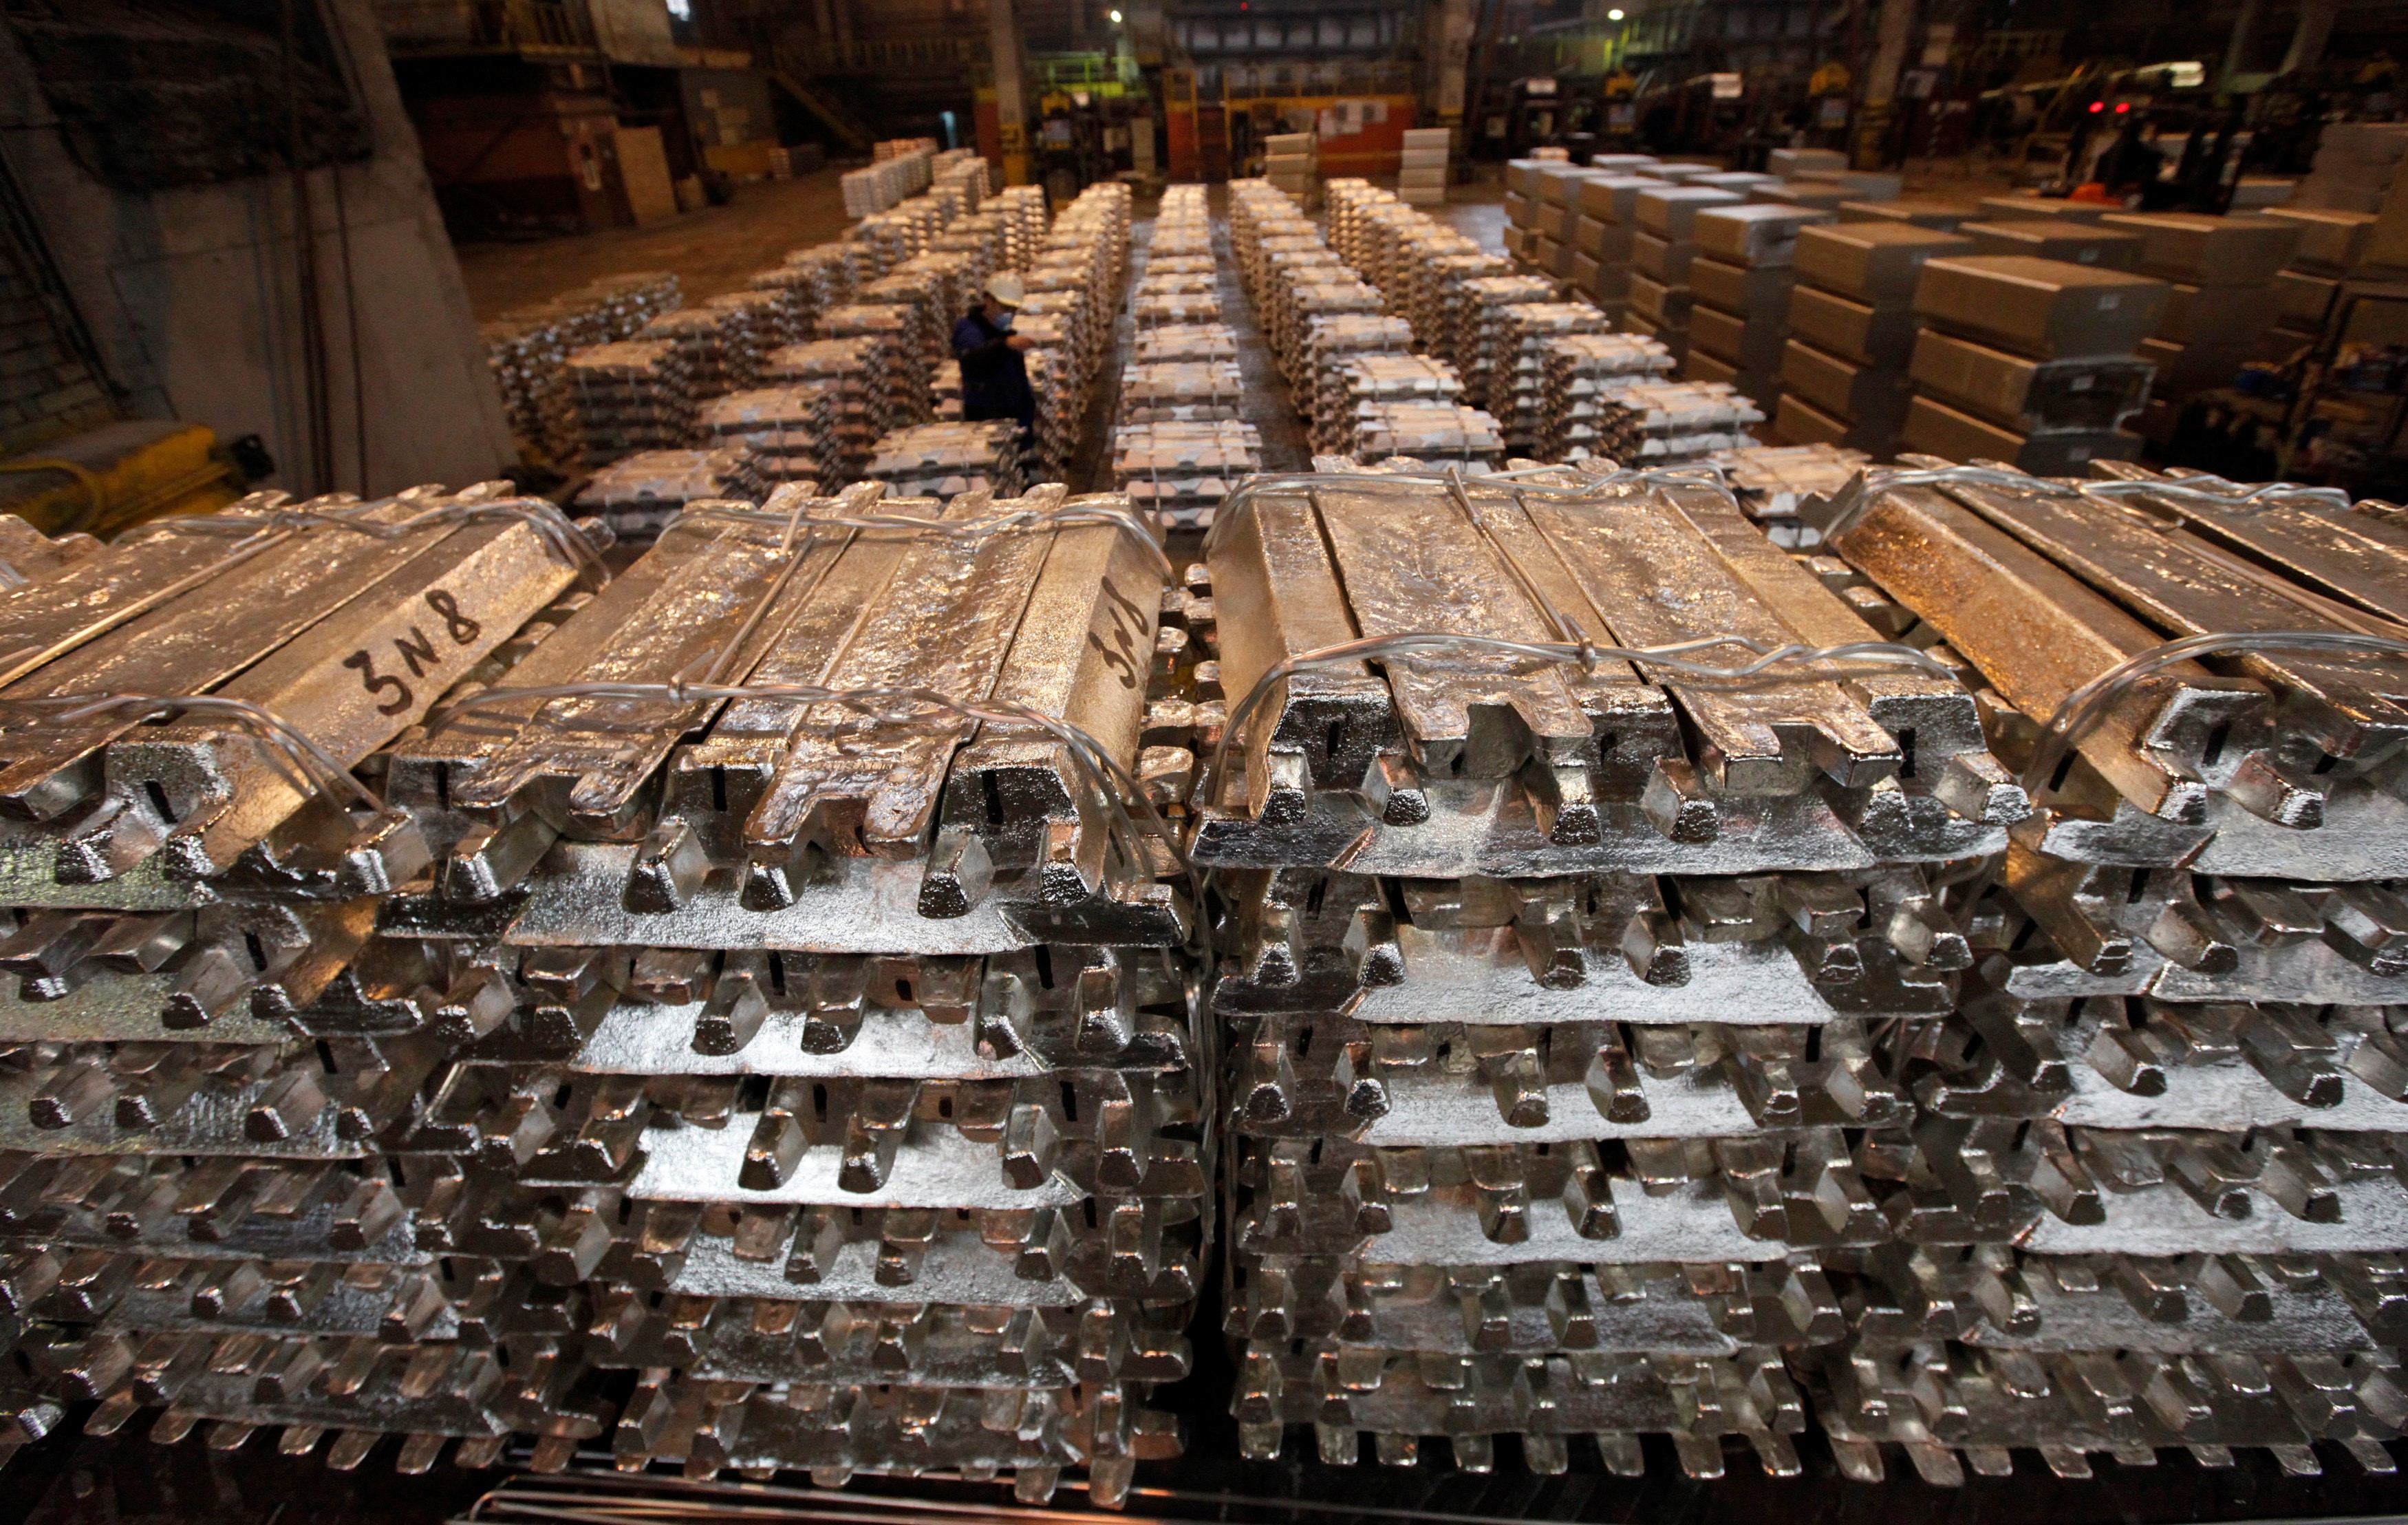 China’s aluminium ingot inventories record slower weekly decline settling at 1.09 million tonnes on March 30